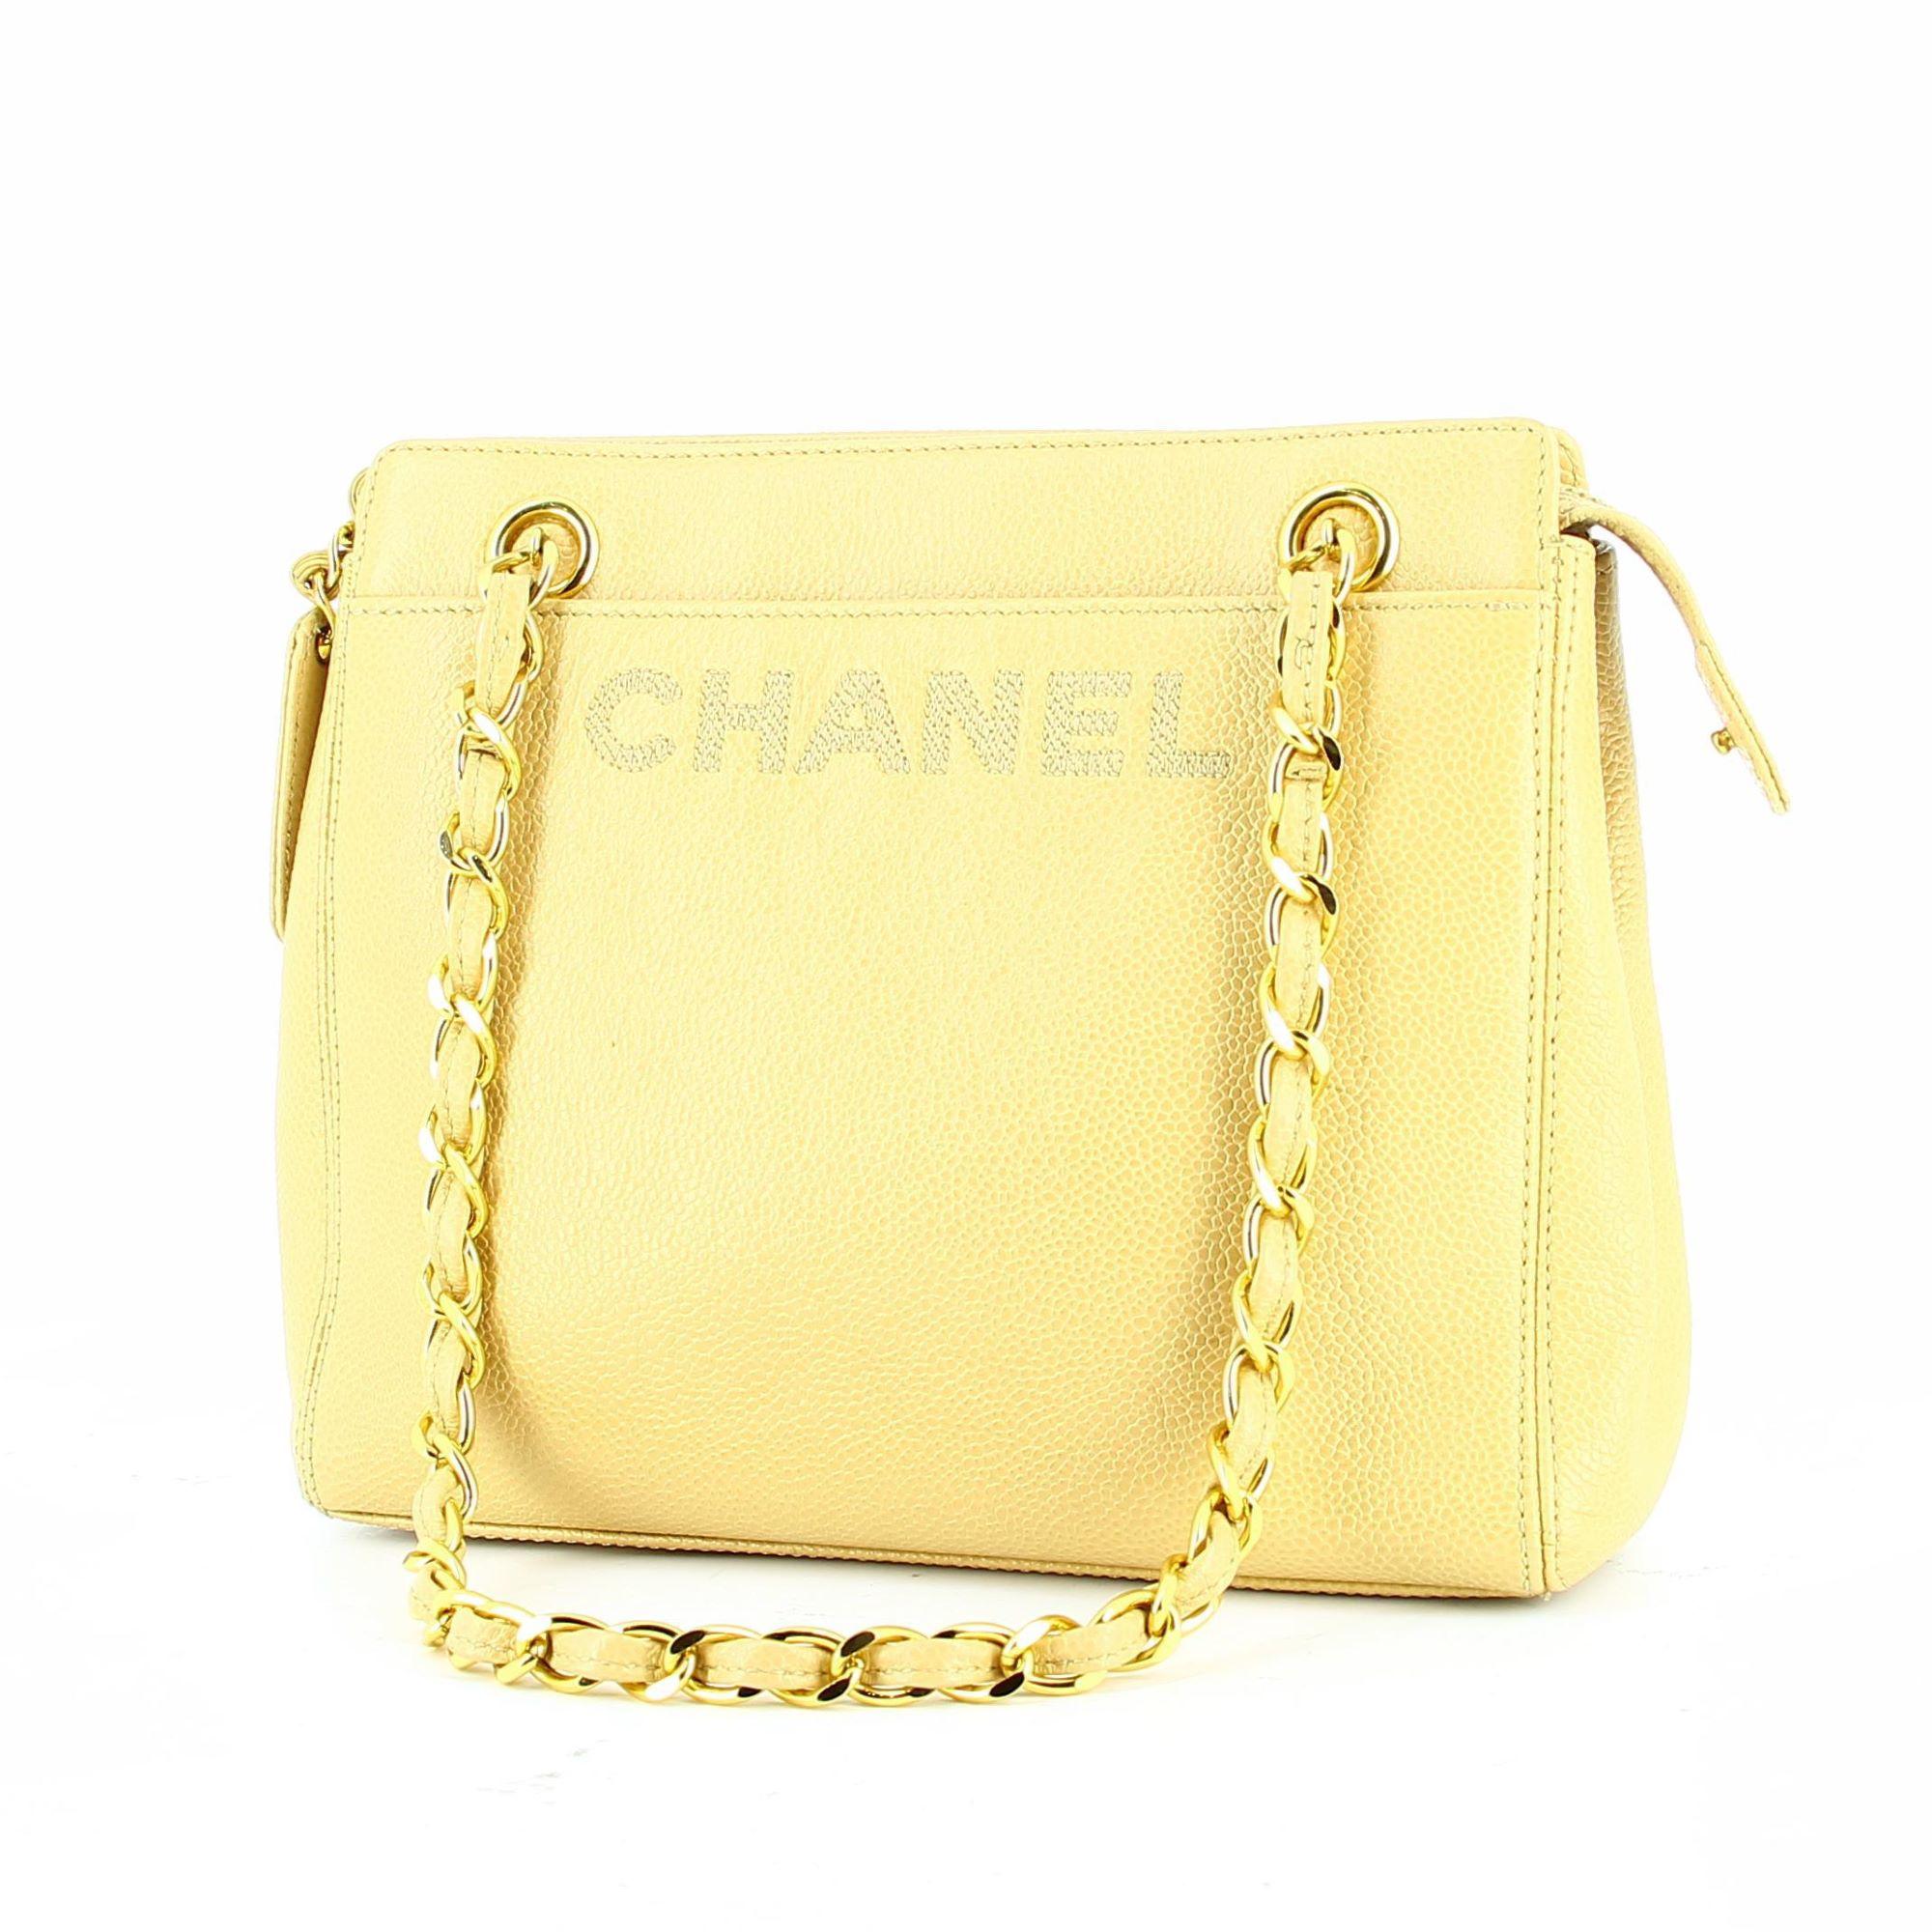 1990s Chanel Yellow Leather Bag.
Very good condition show some light signs of use and wear but nothing visible. With the gold chain and the chanel on the front side this leather bag is a must have in your closet.
Gold tone metal hardware finishes